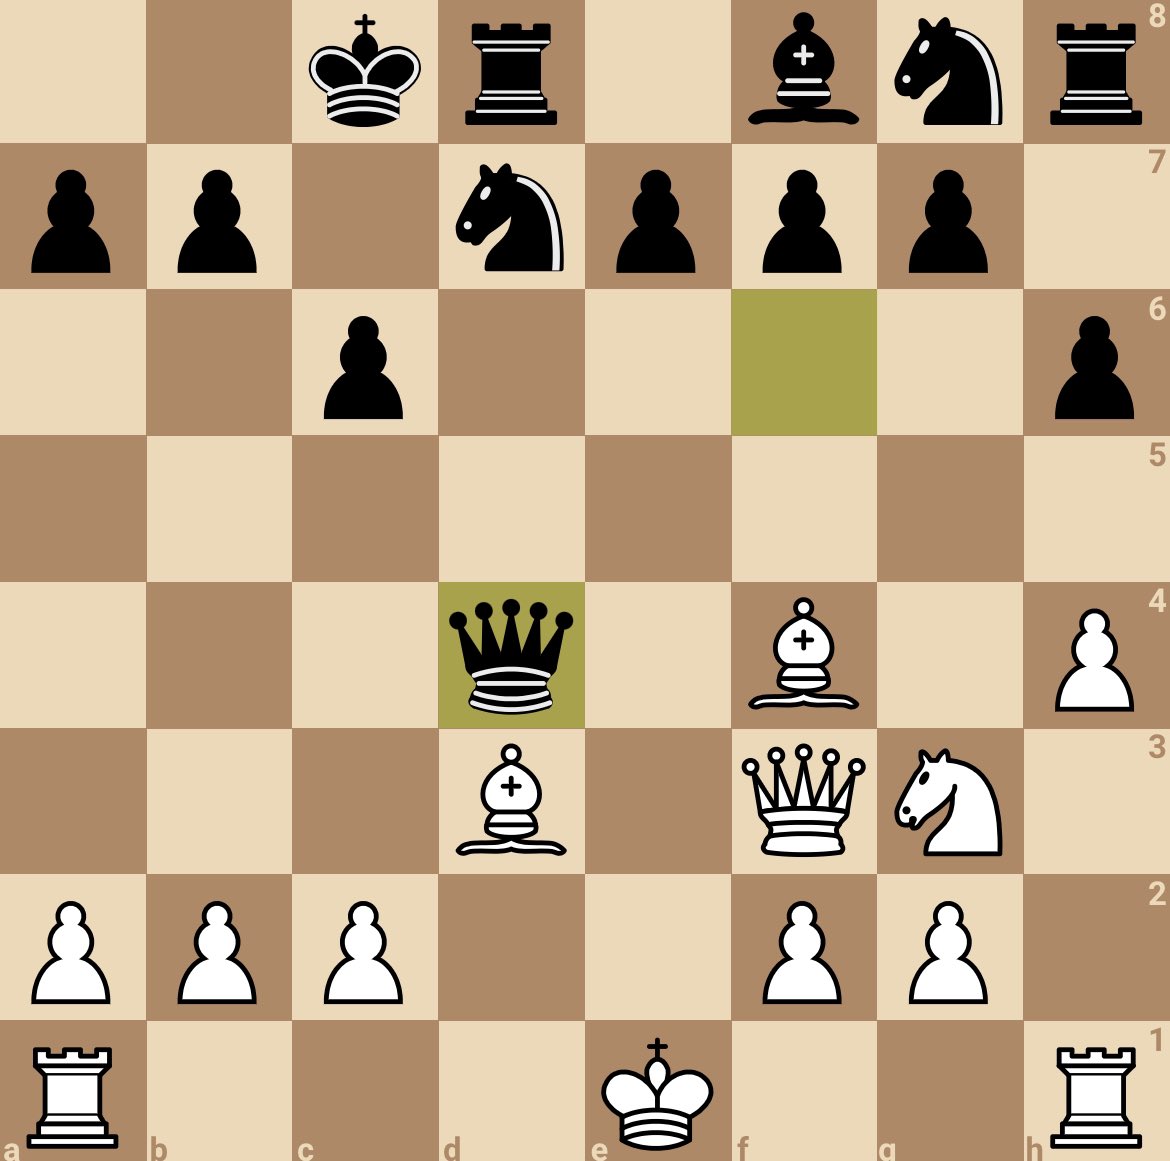 lichess.org - Puzzle time! White to play 🤔 ➡️